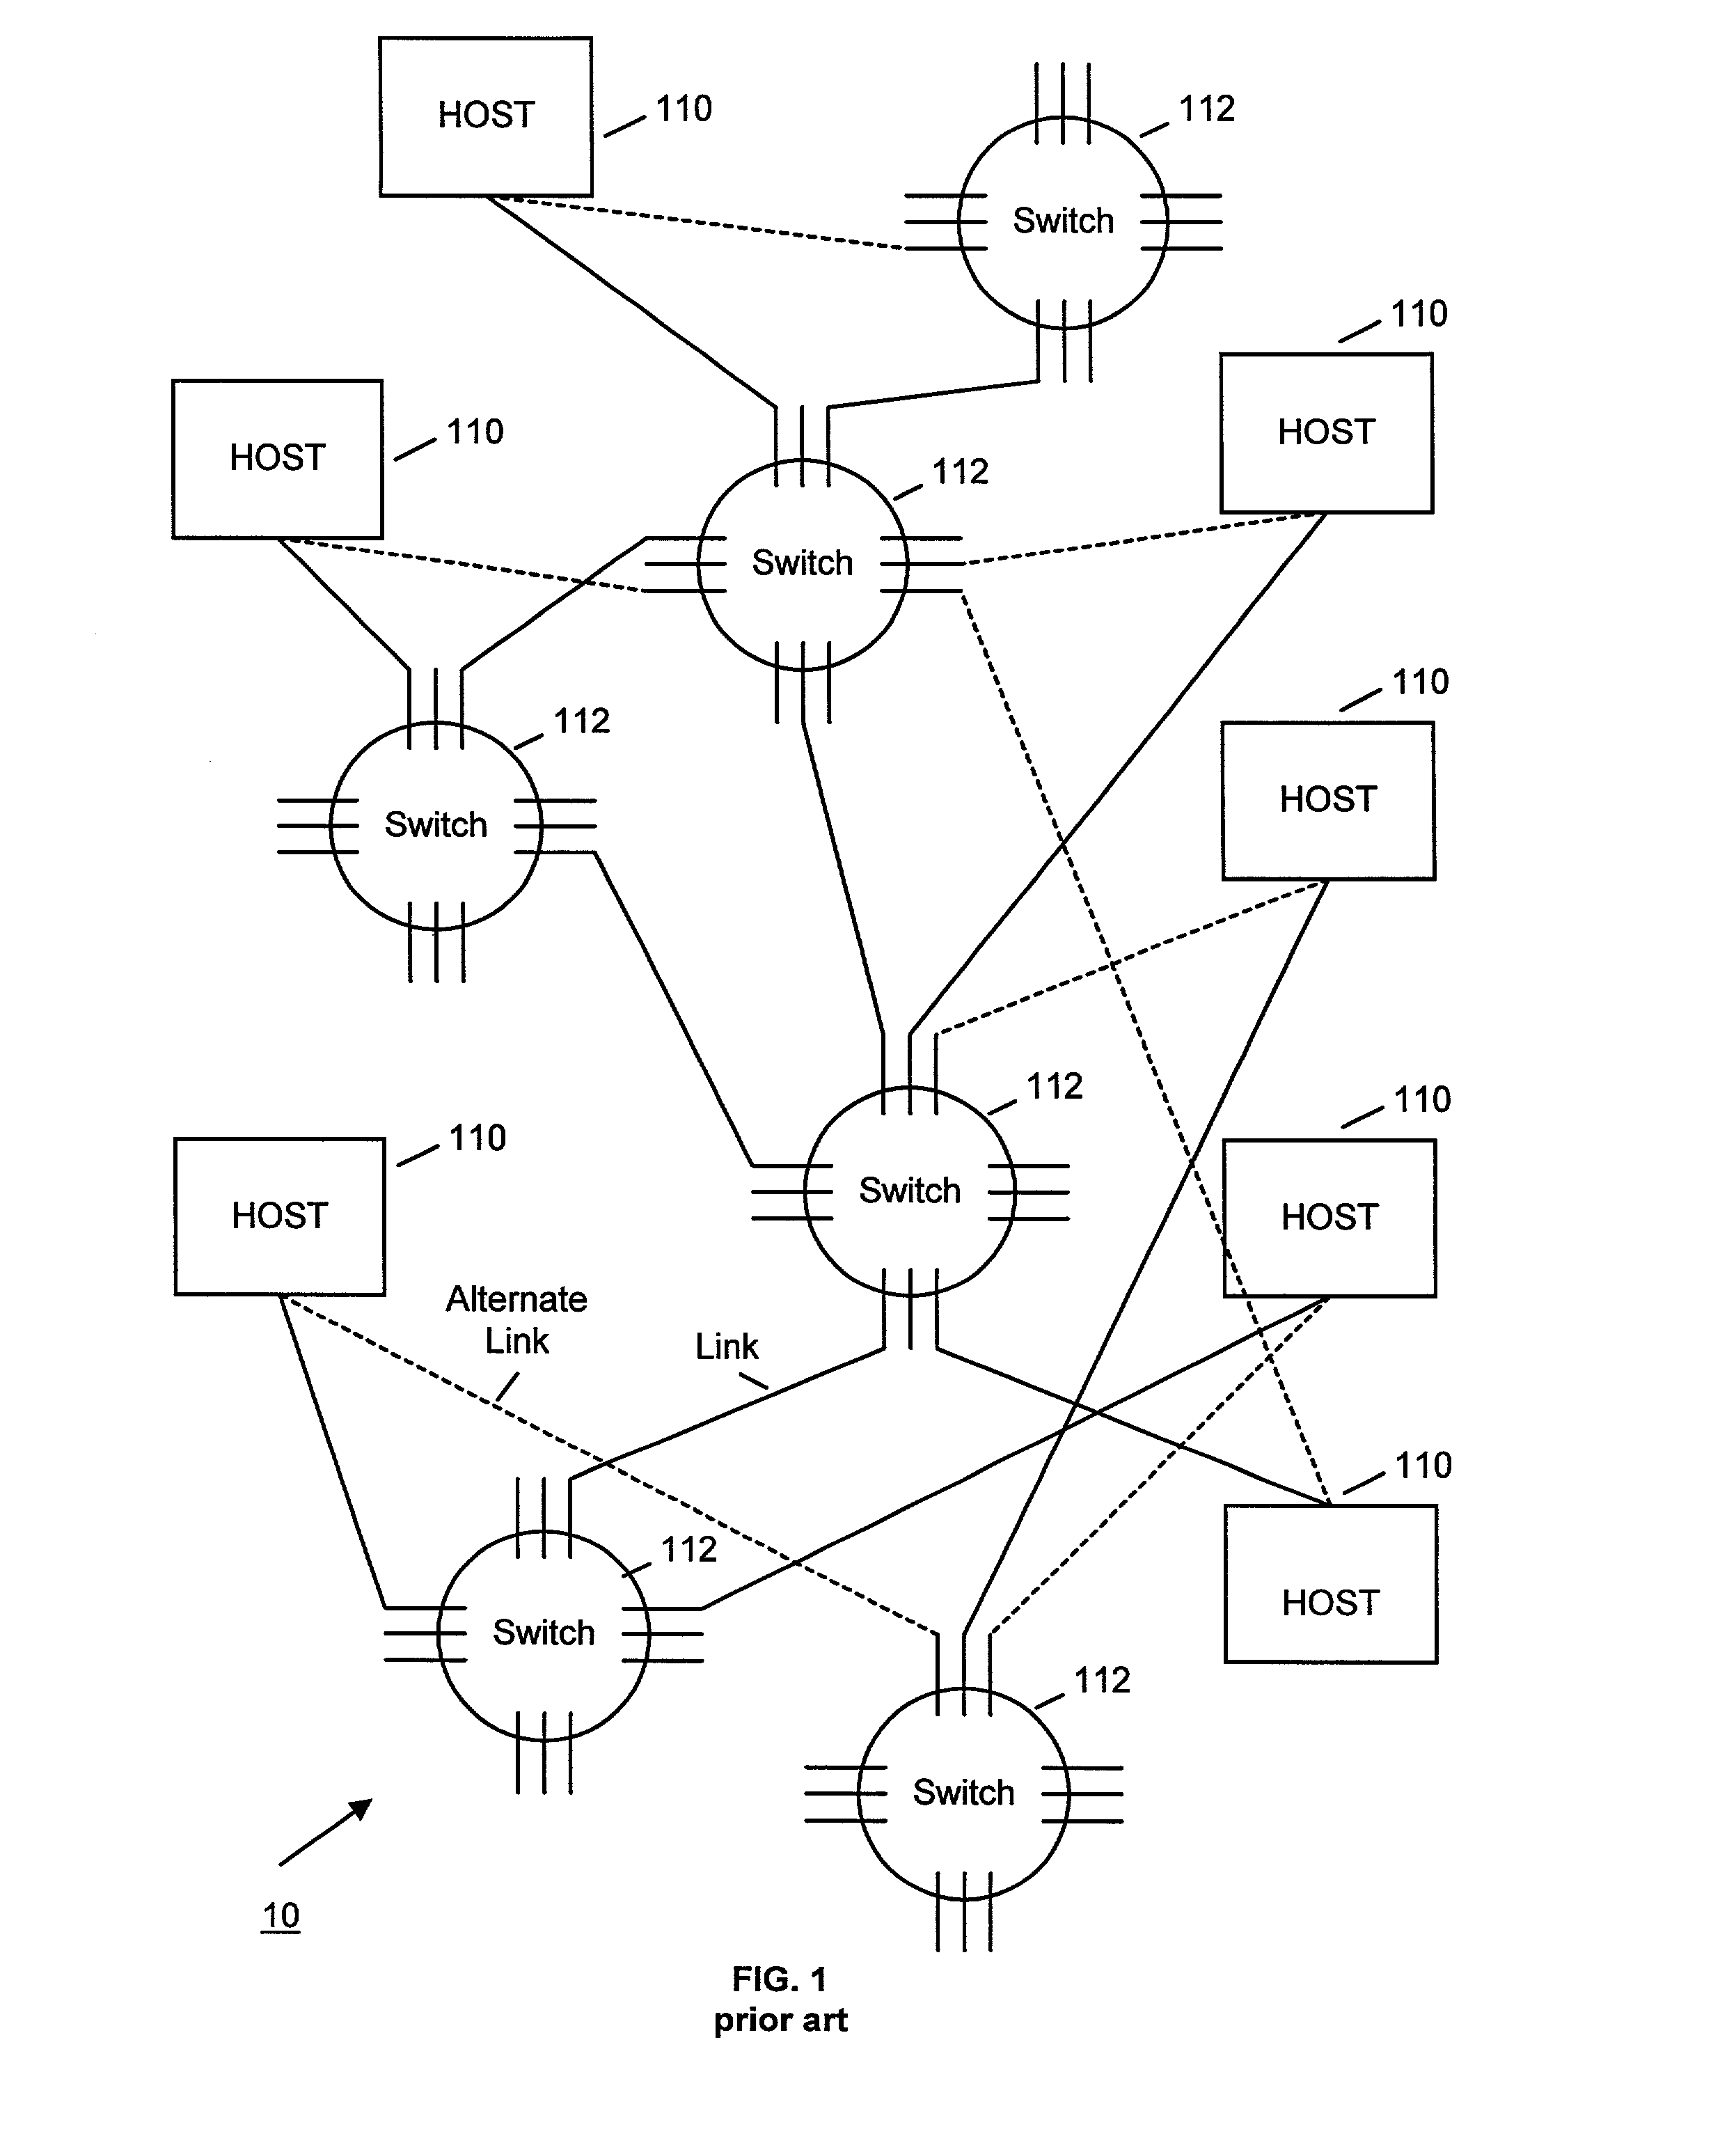 Method and system for limiting the impact of undesirable behavior of computers on a shared data network